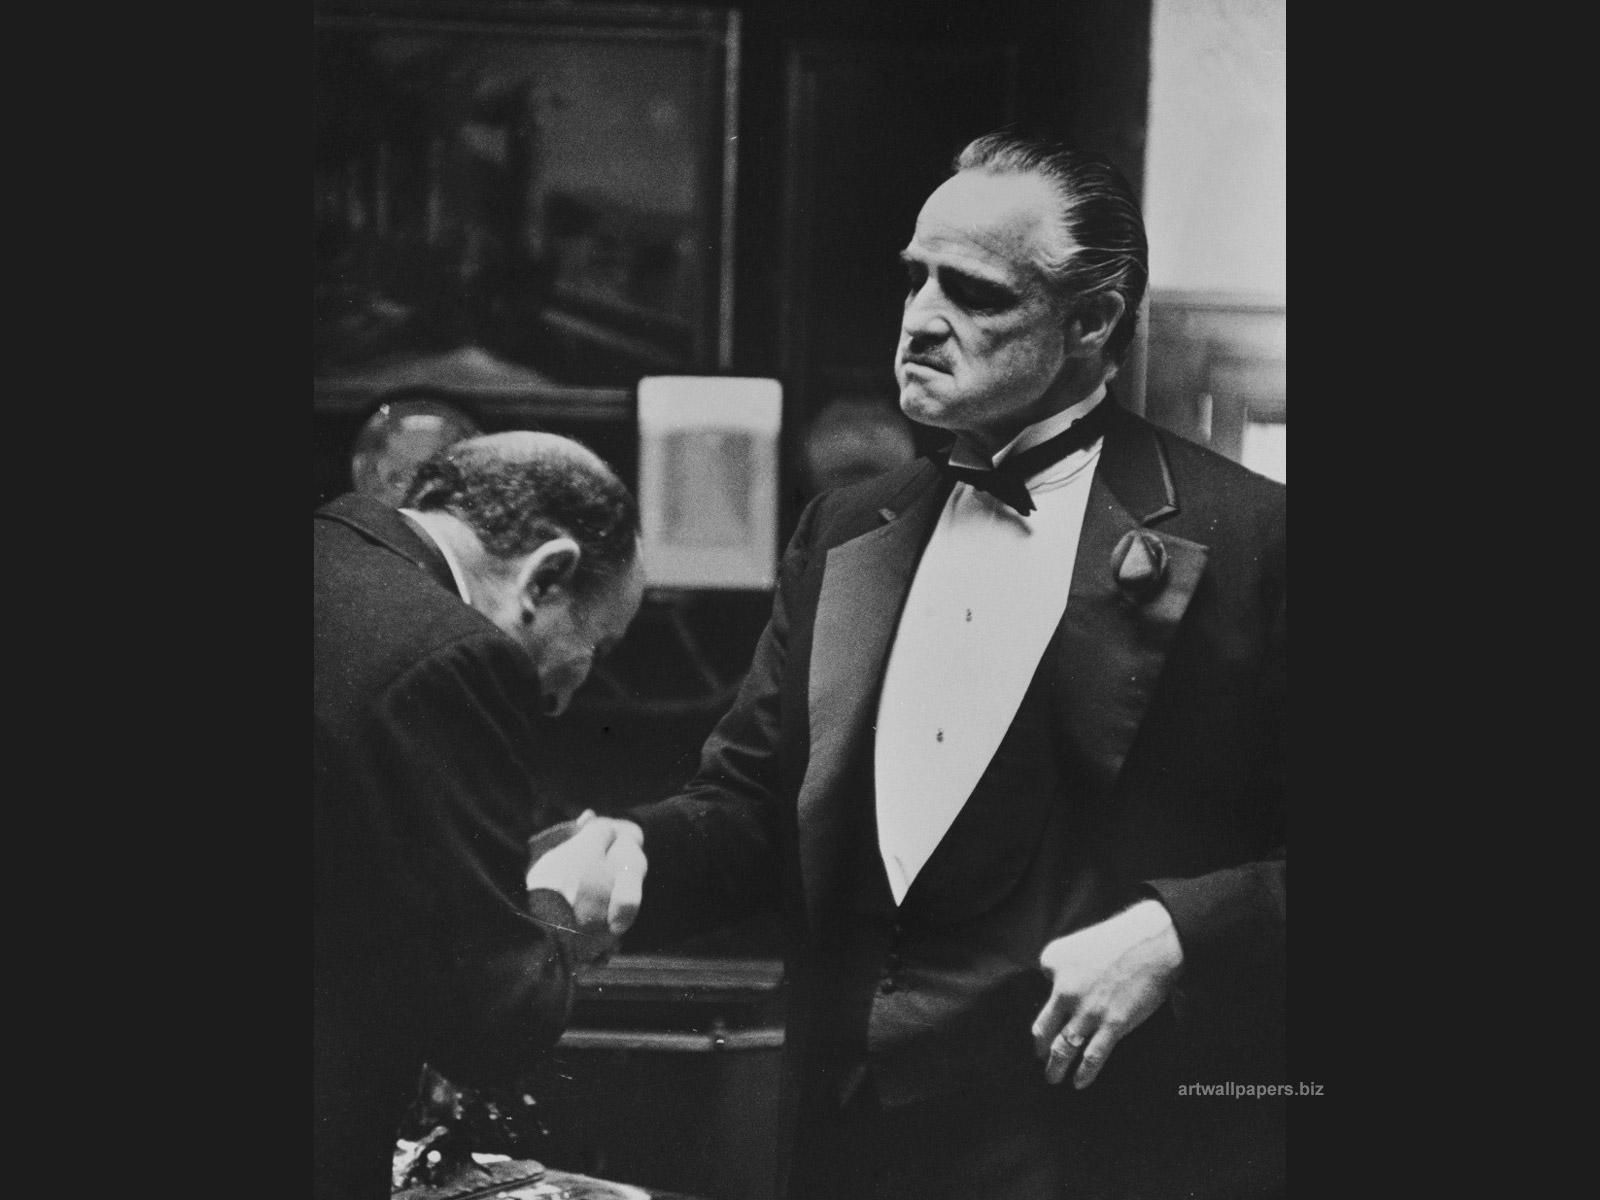 The Godfather Wallpaper Iphone Music And Movie Wallpapers 13757